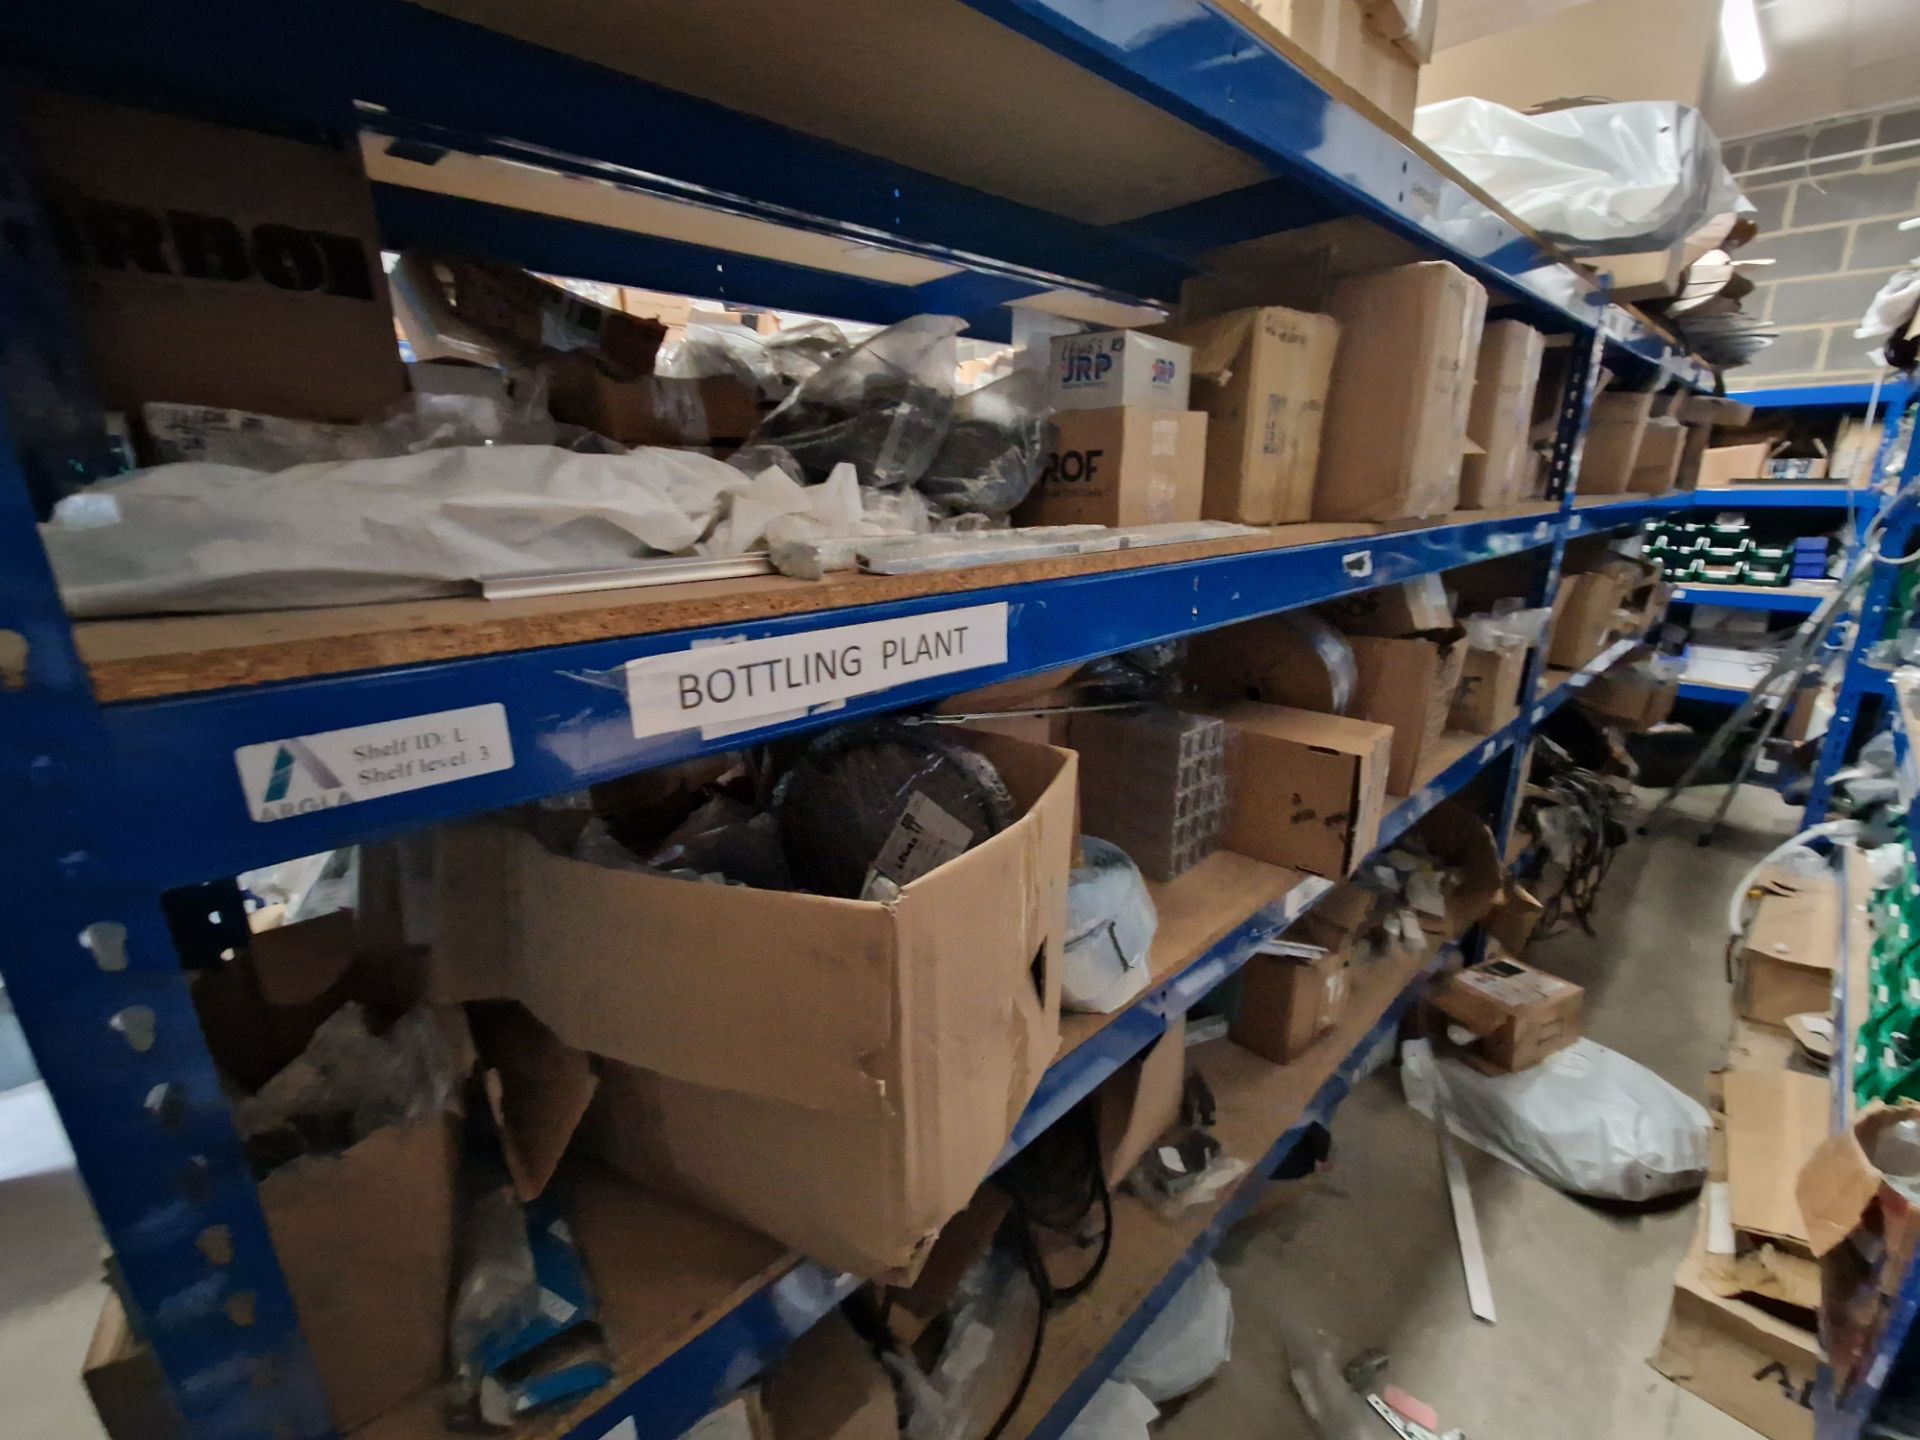 Contents to Four Bays of Shelving, including Rubber Gaskets, Aluminium Profile, End Caps, Screws, - Image 10 of 13